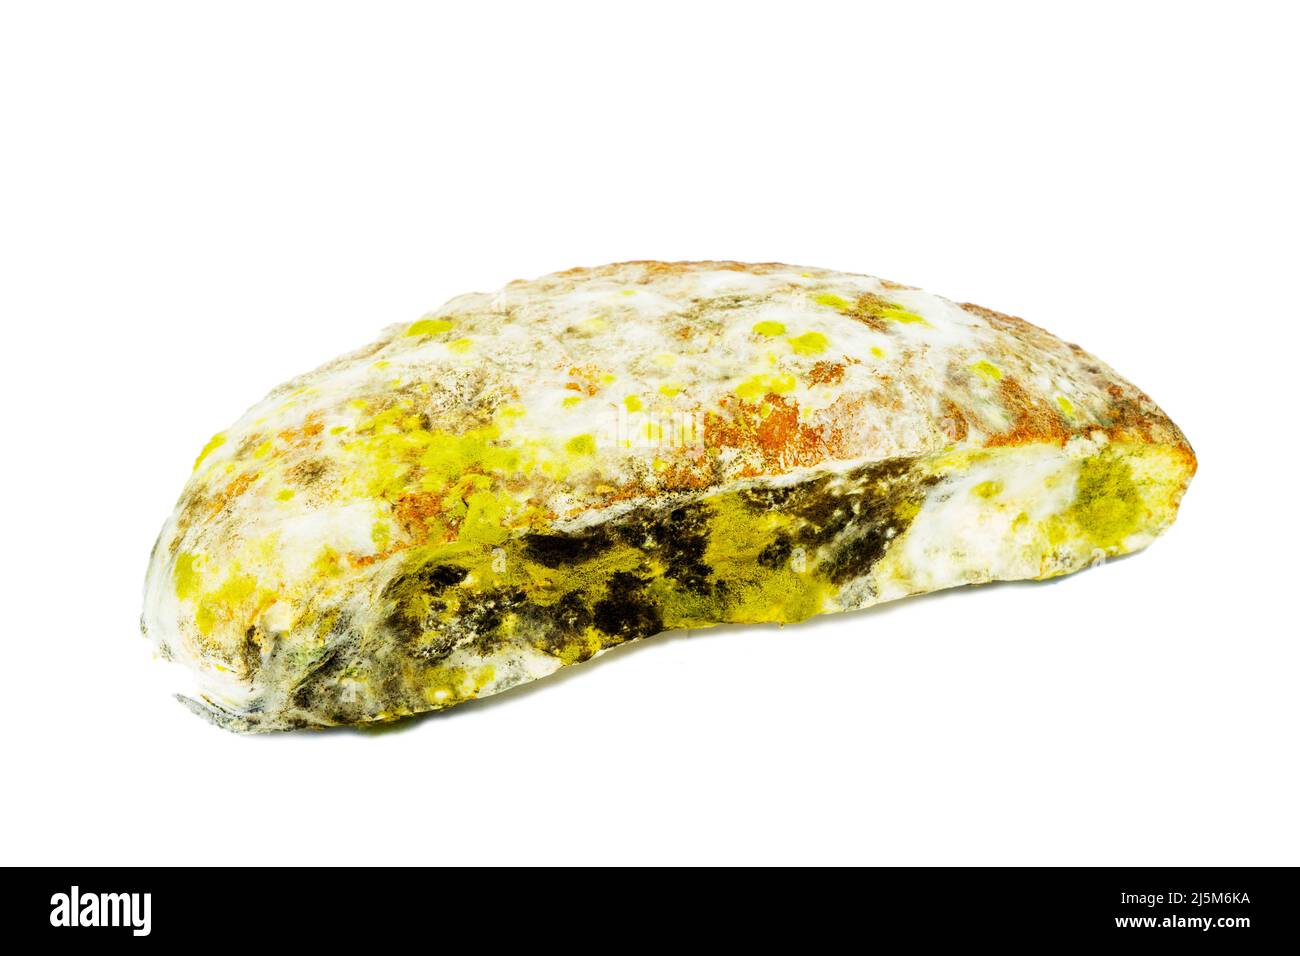 Mold on food. A mod for fluffy spores on bread. A piece of moldy bread on a white background. Stock Photo